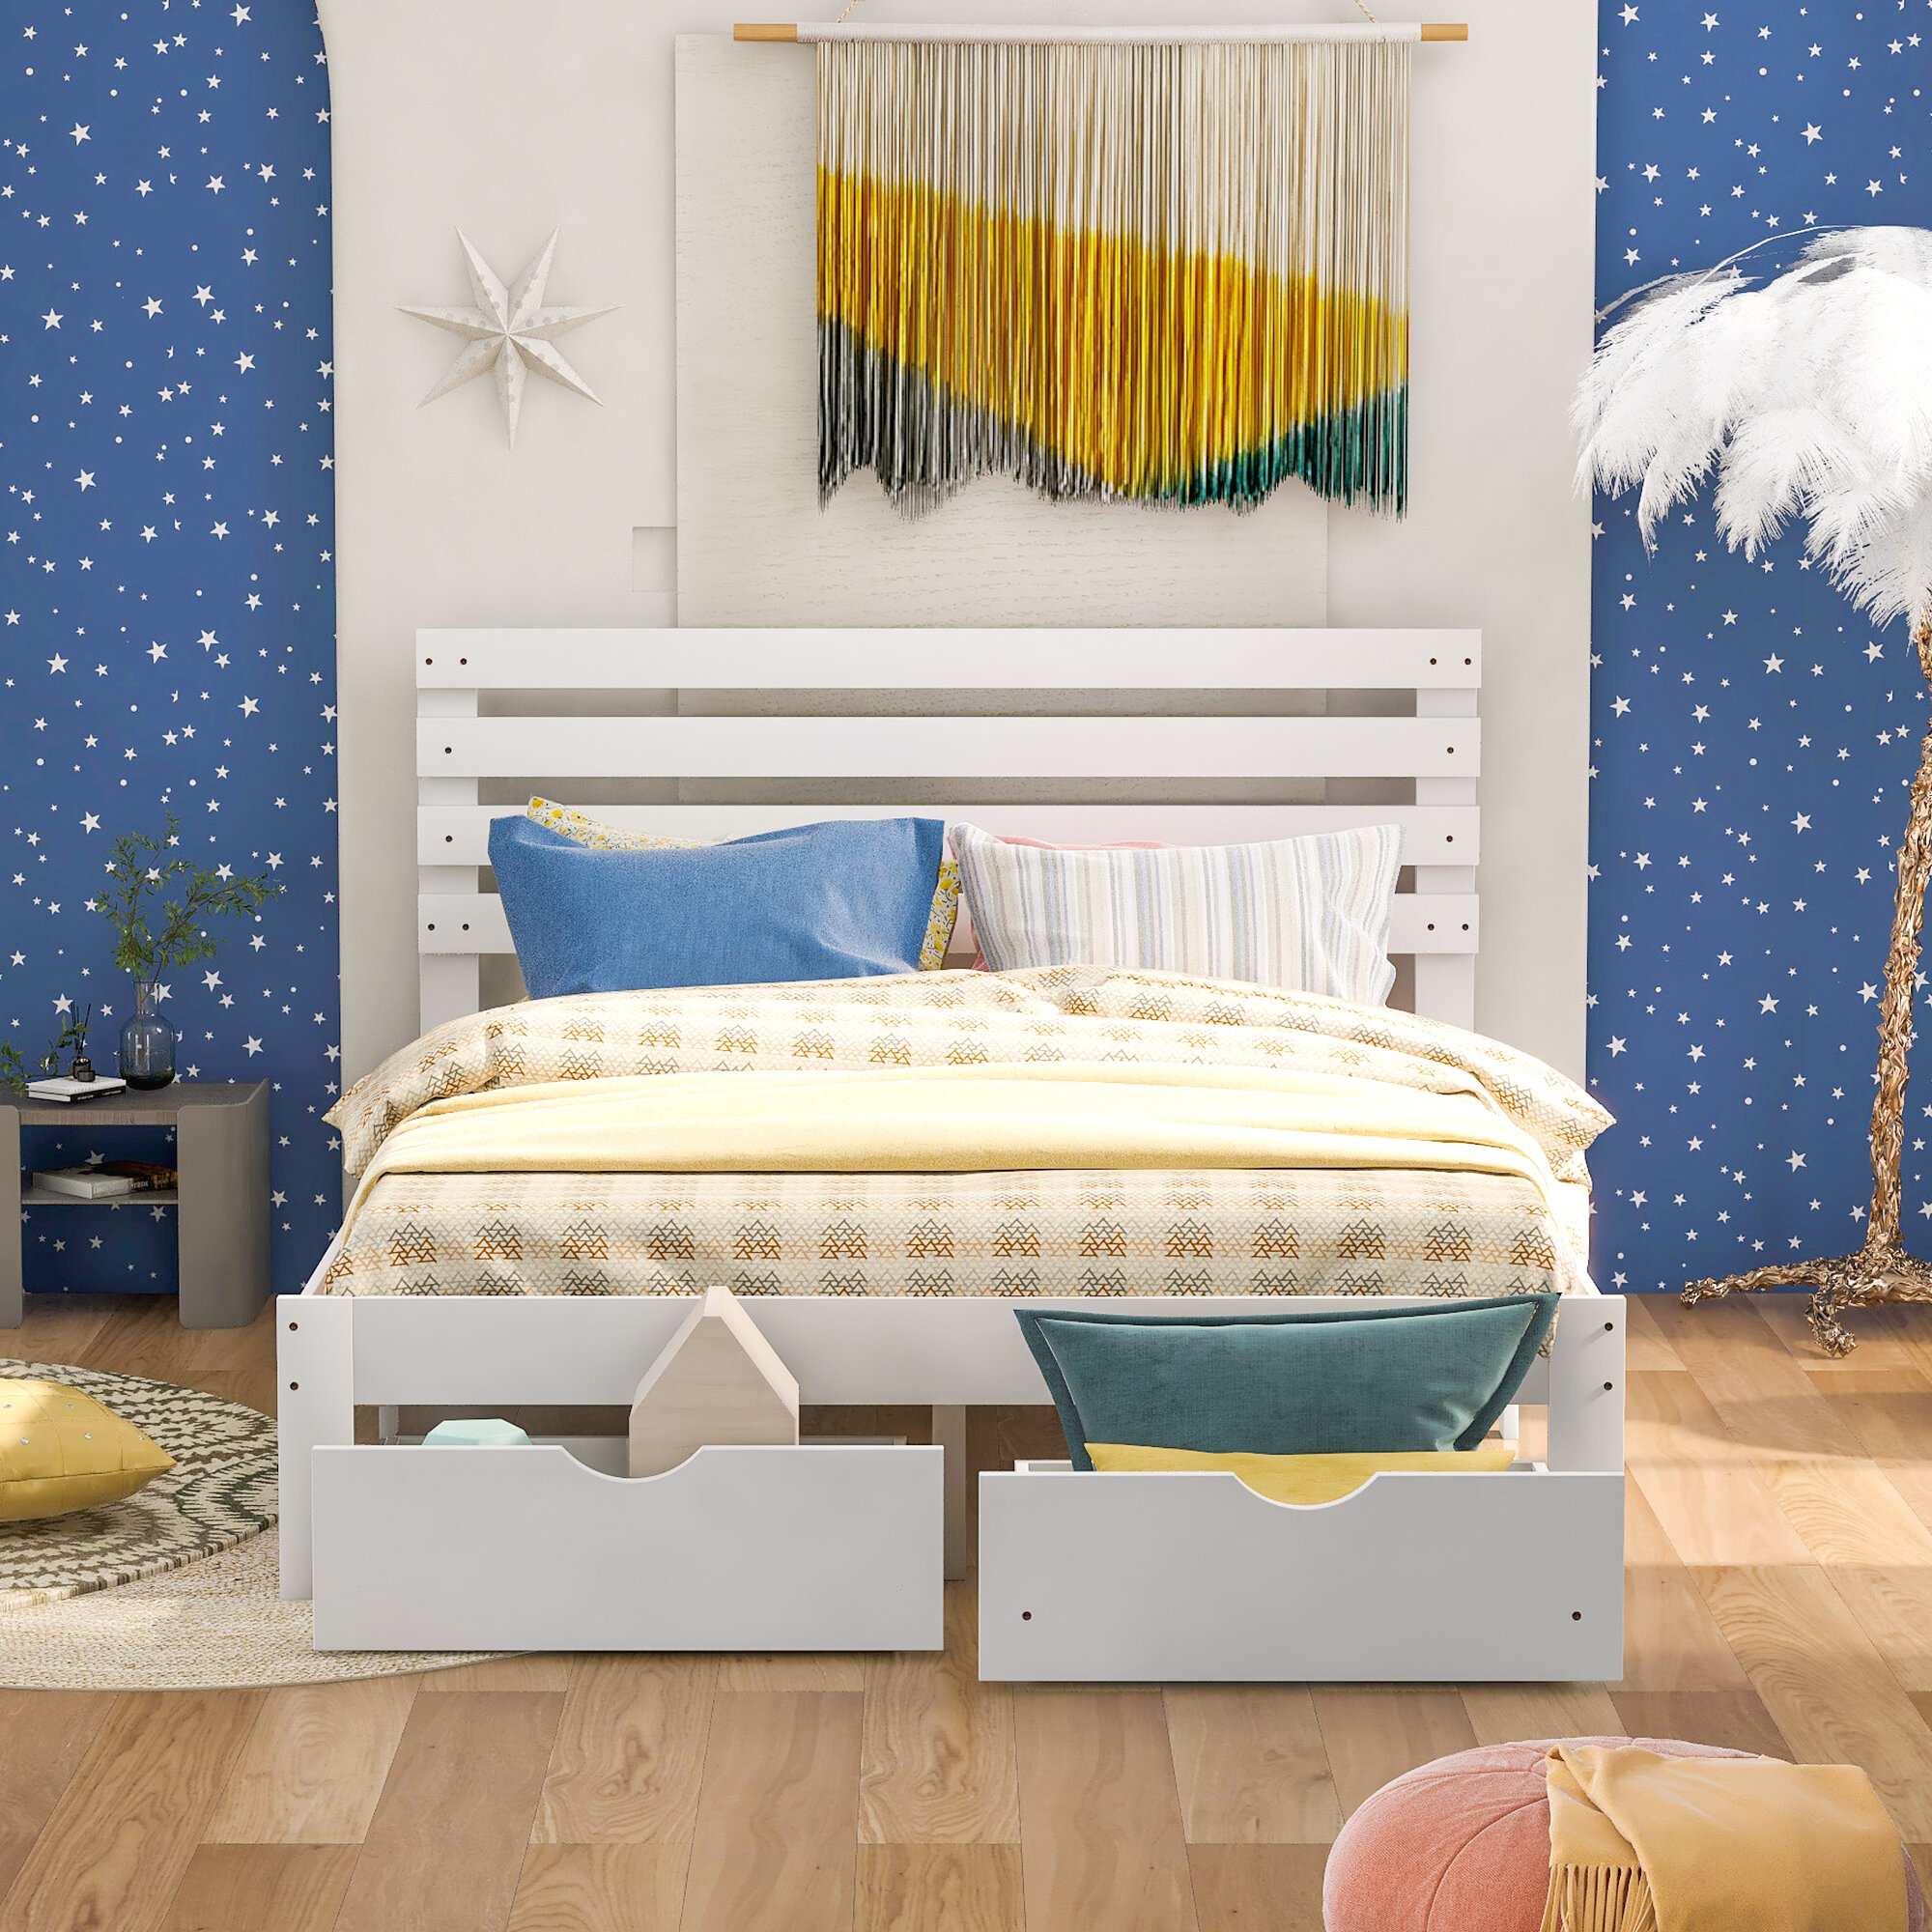 Queen Size White Storage Beds You Ll Love In 2021 Wayfair